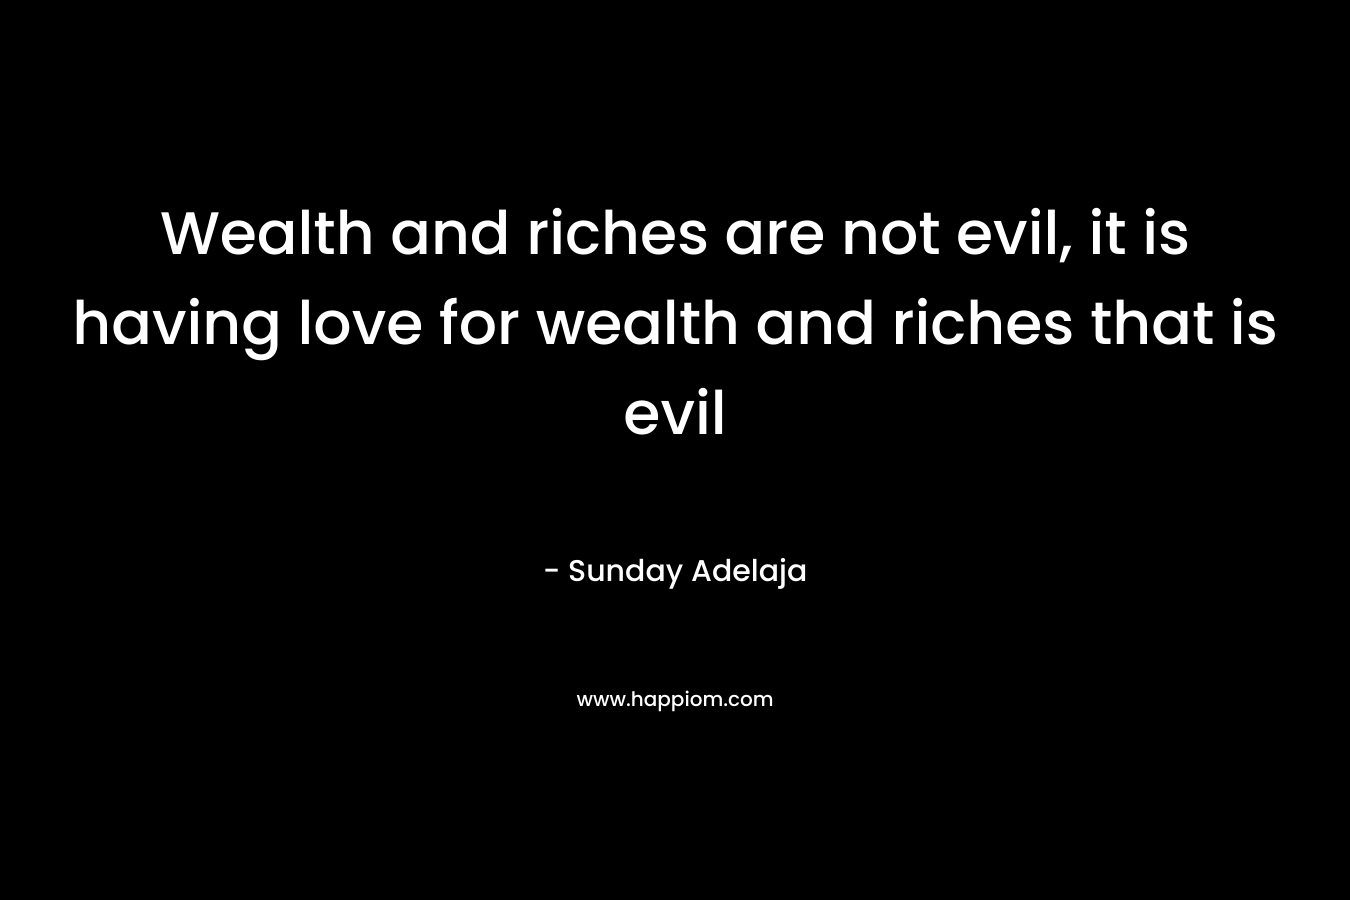 Wealth and riches are not evil, it is having love for wealth and riches that is evil